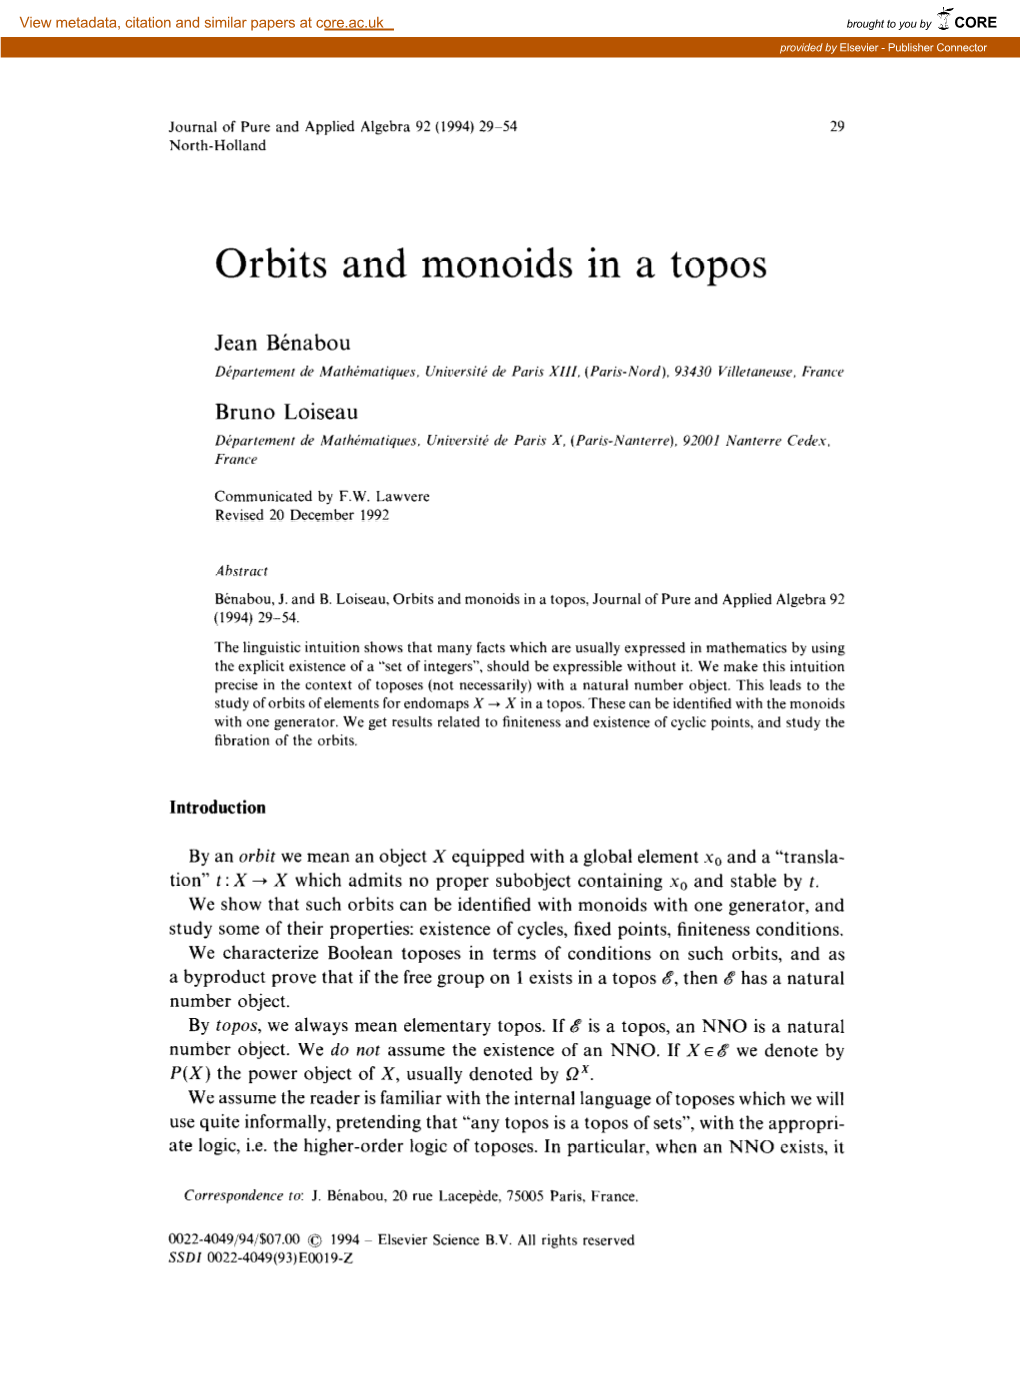 Orbits and Monoids in a Topos